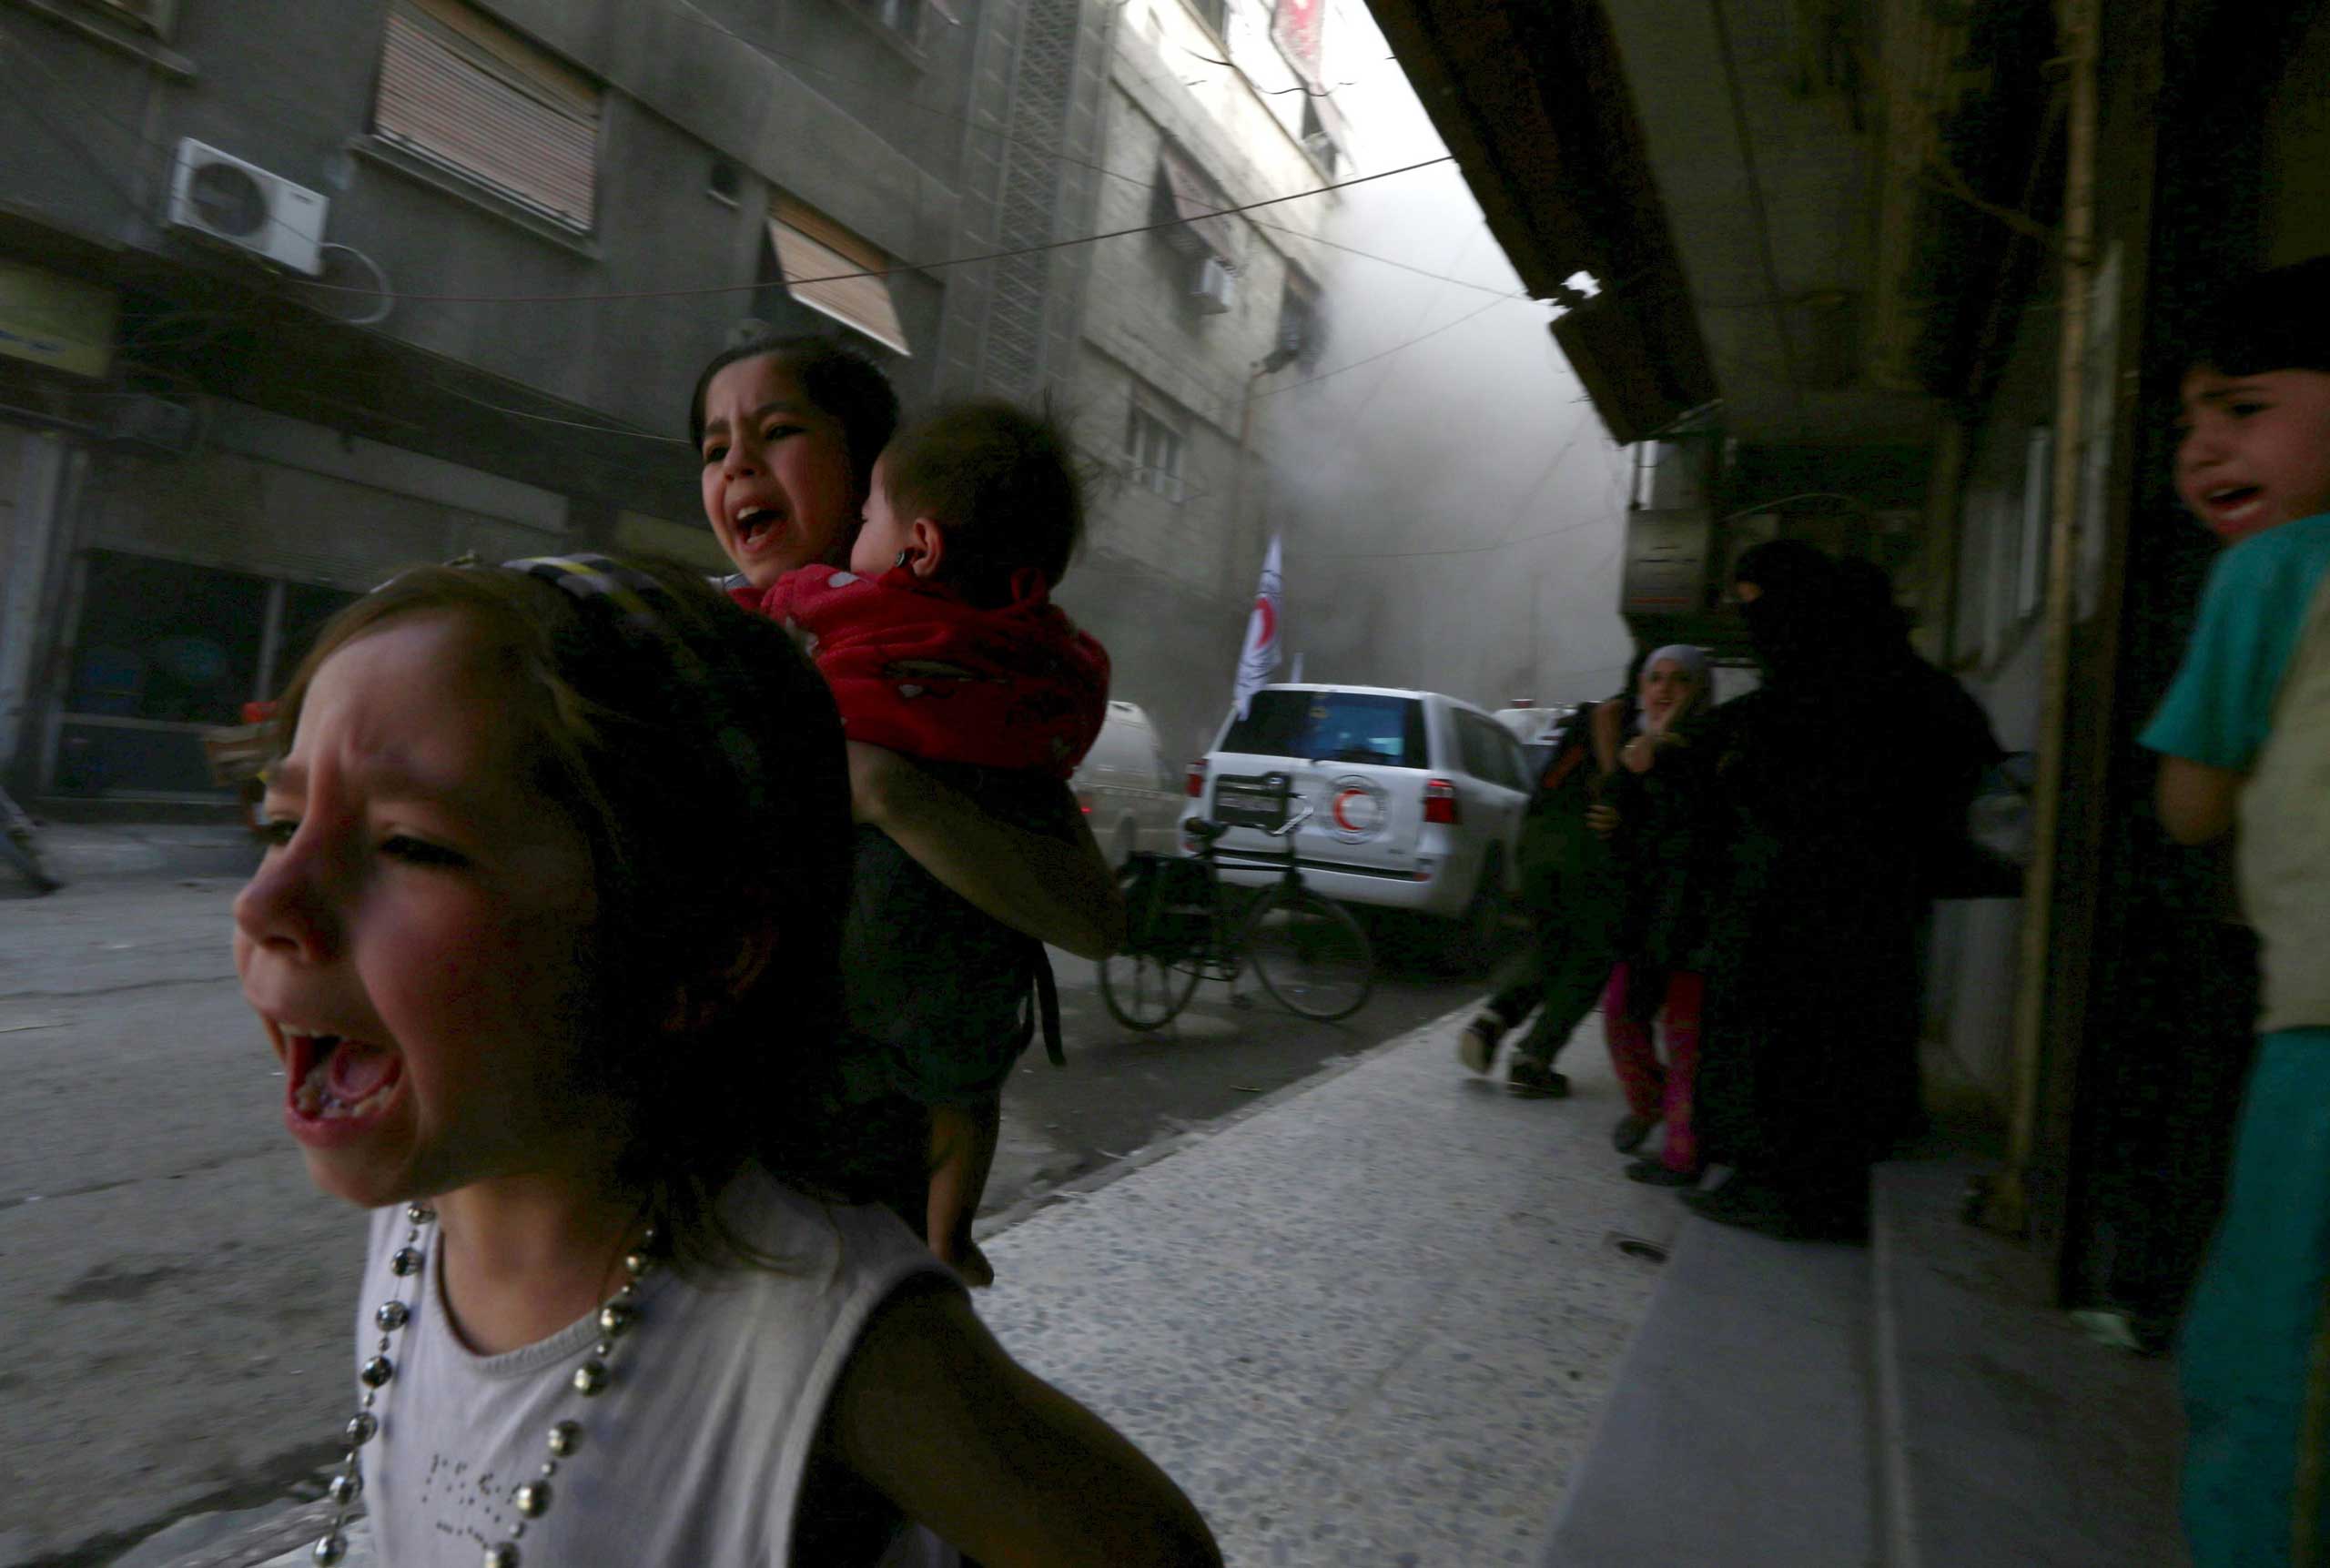 Children react after what activists said was shelling by forces loyal to Syria's President Assad near the Syrian Arab Red Crescent center in the Douma neighborhood of Damascus